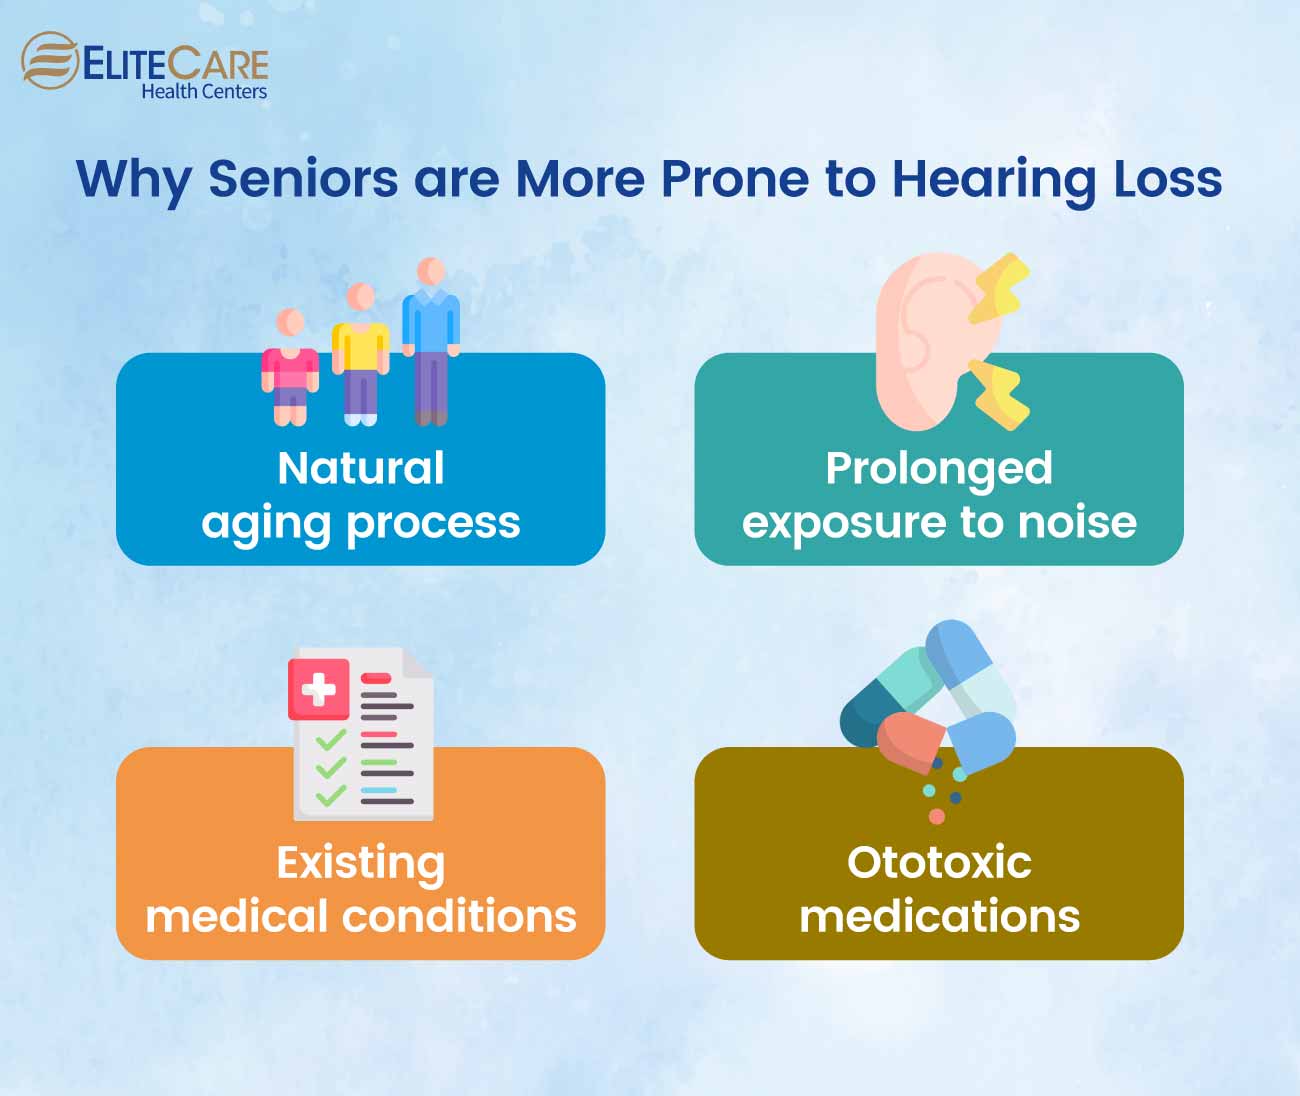 Why Seniors Are More Prone to Hearing Loss